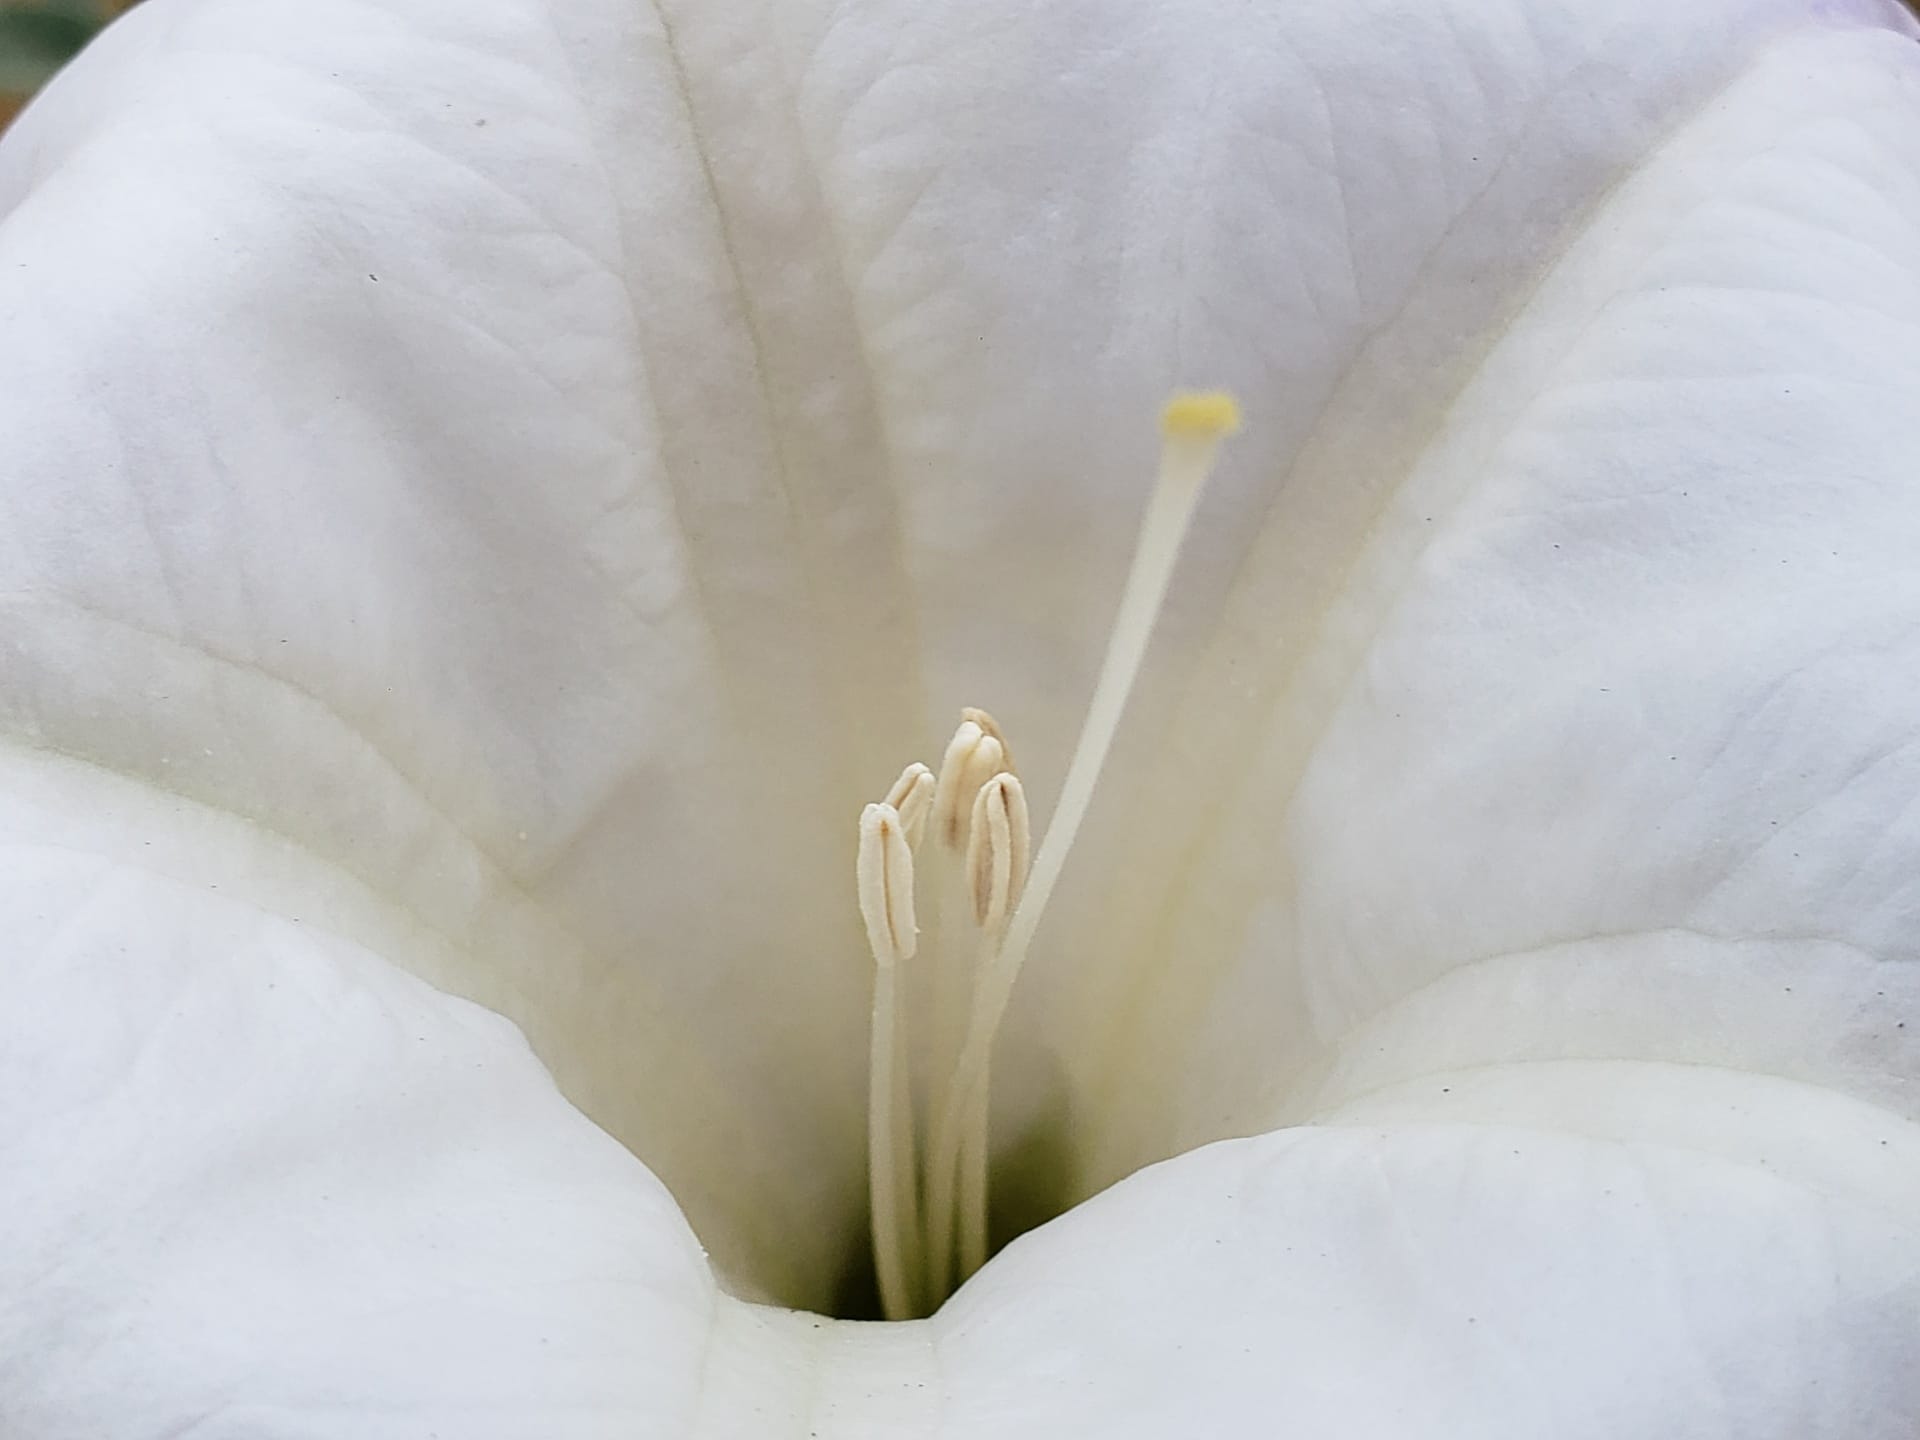 What is the stamen of a flower and what function does it have?